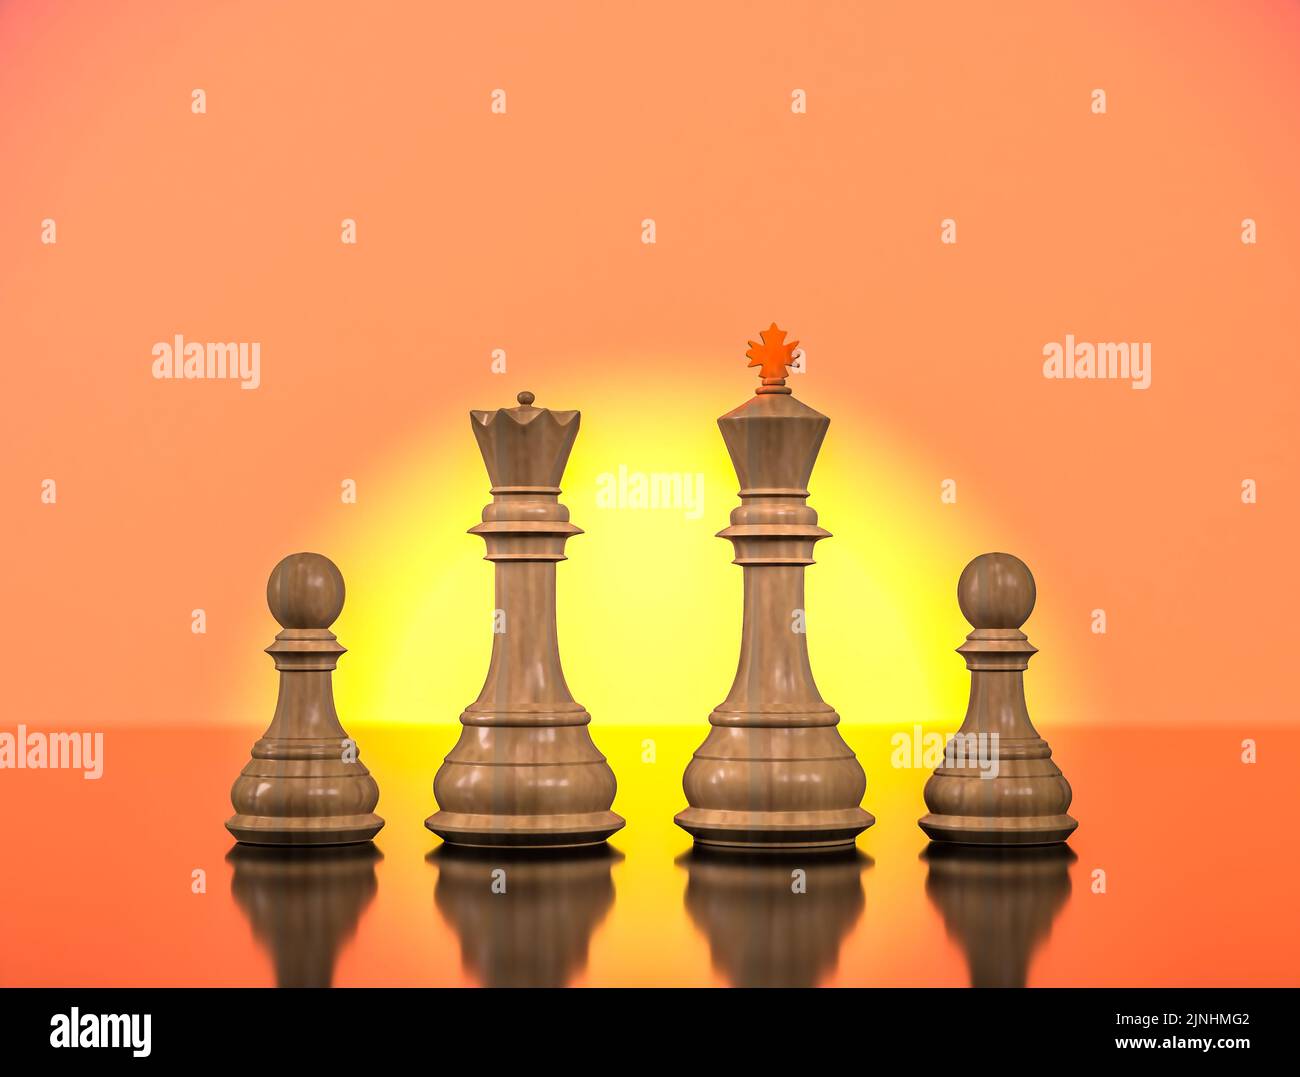 King, queen and chess pawns standing side by side looking at the sun, concept of love, affection and future. 3d illustrations Stock Photo